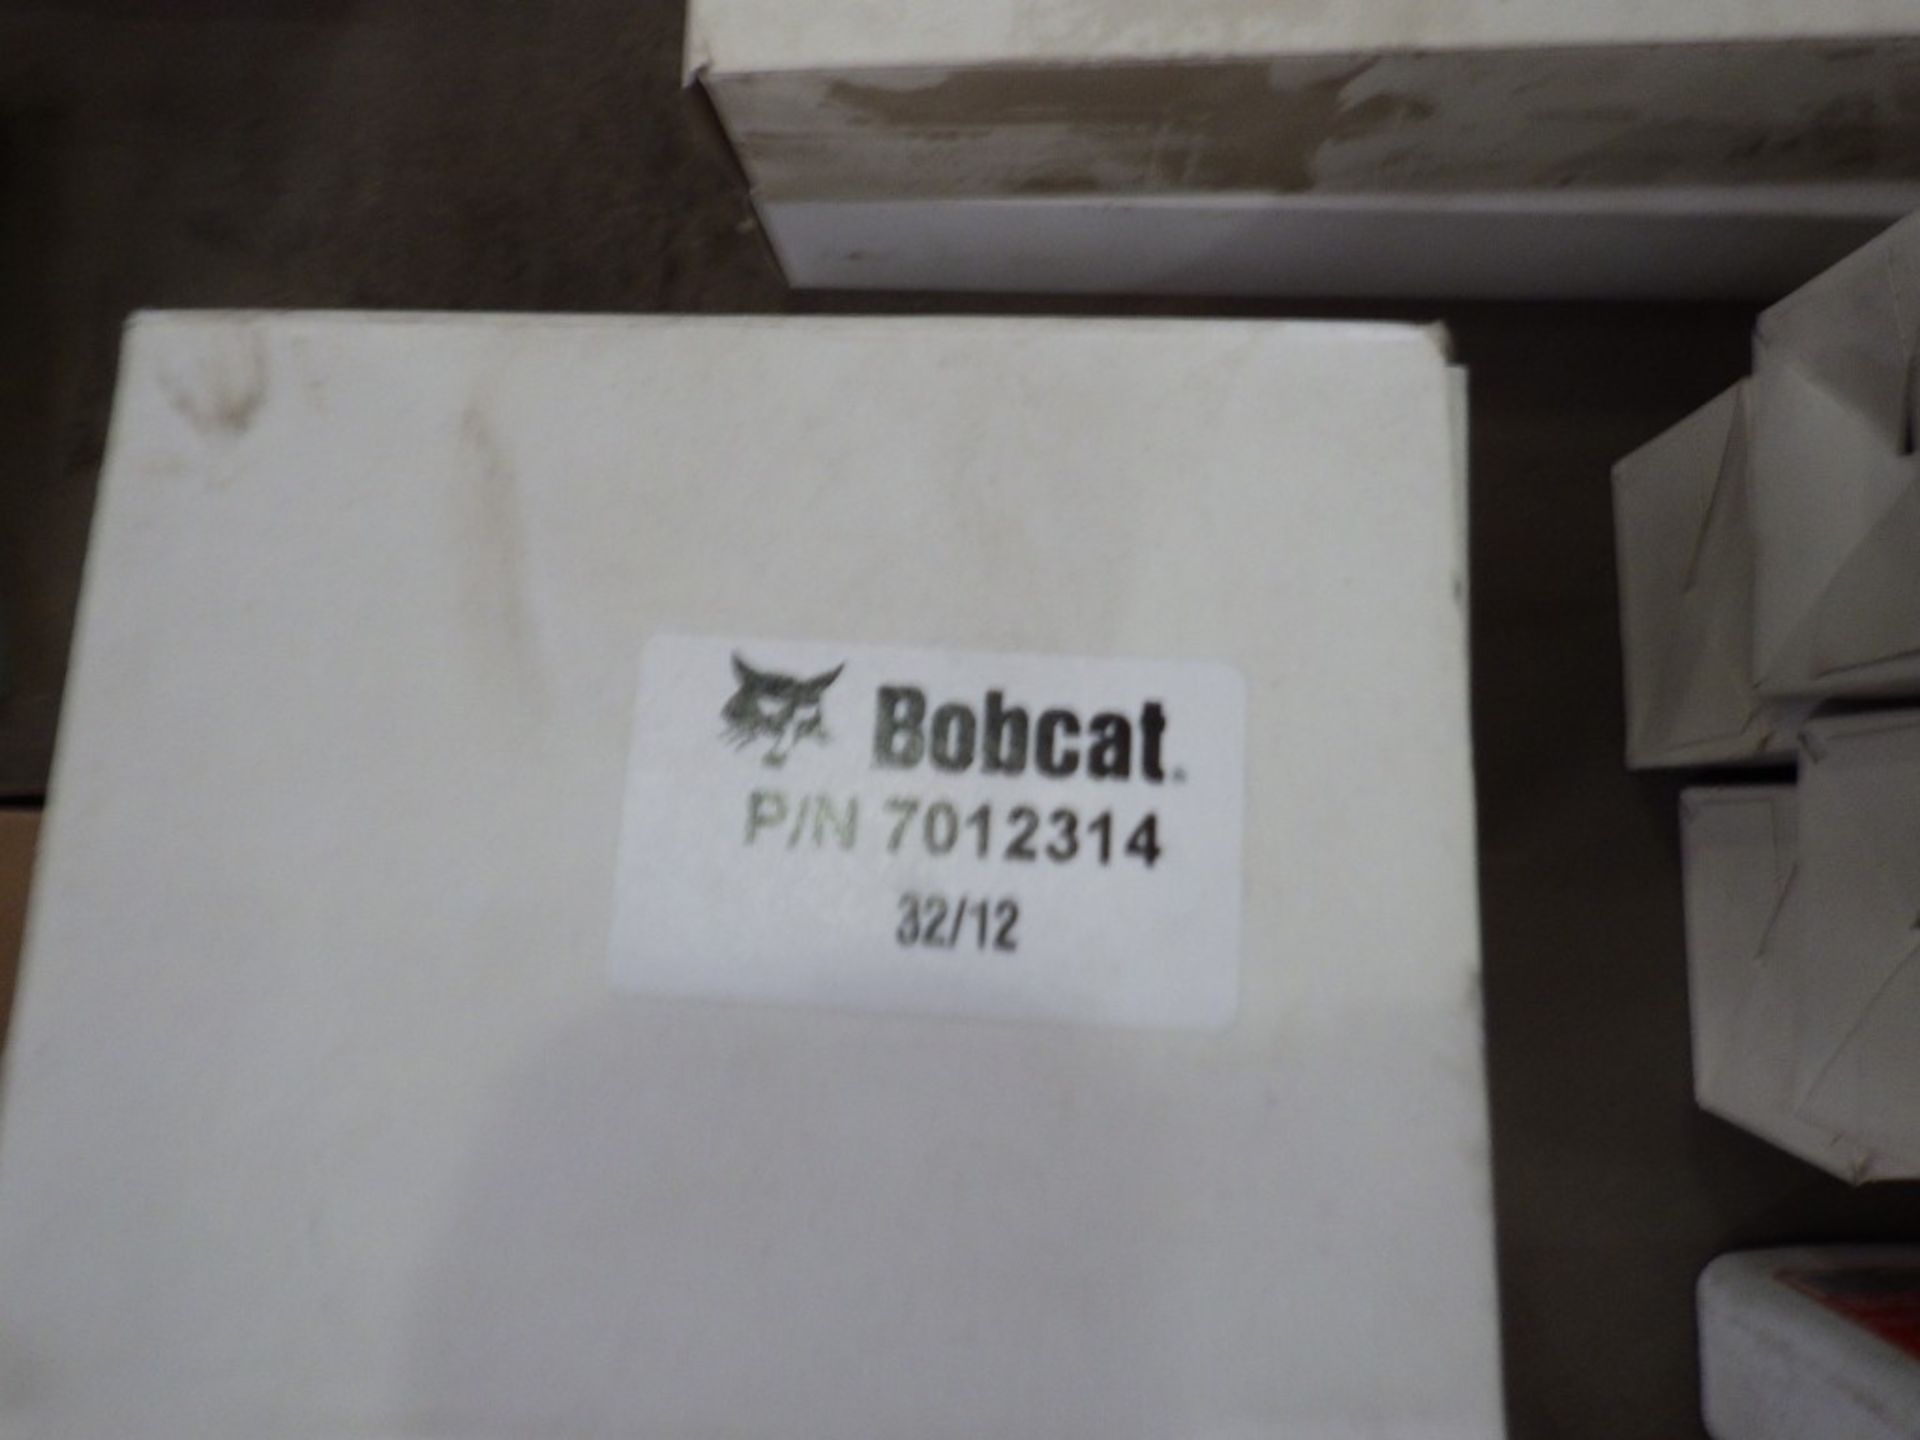 ASSORTED BOBCAT FILTERS & FILTER KITS INCL. P/N: 6987575 6900611, 6987751 (3 OF), 6901188, - Image 20 of 22